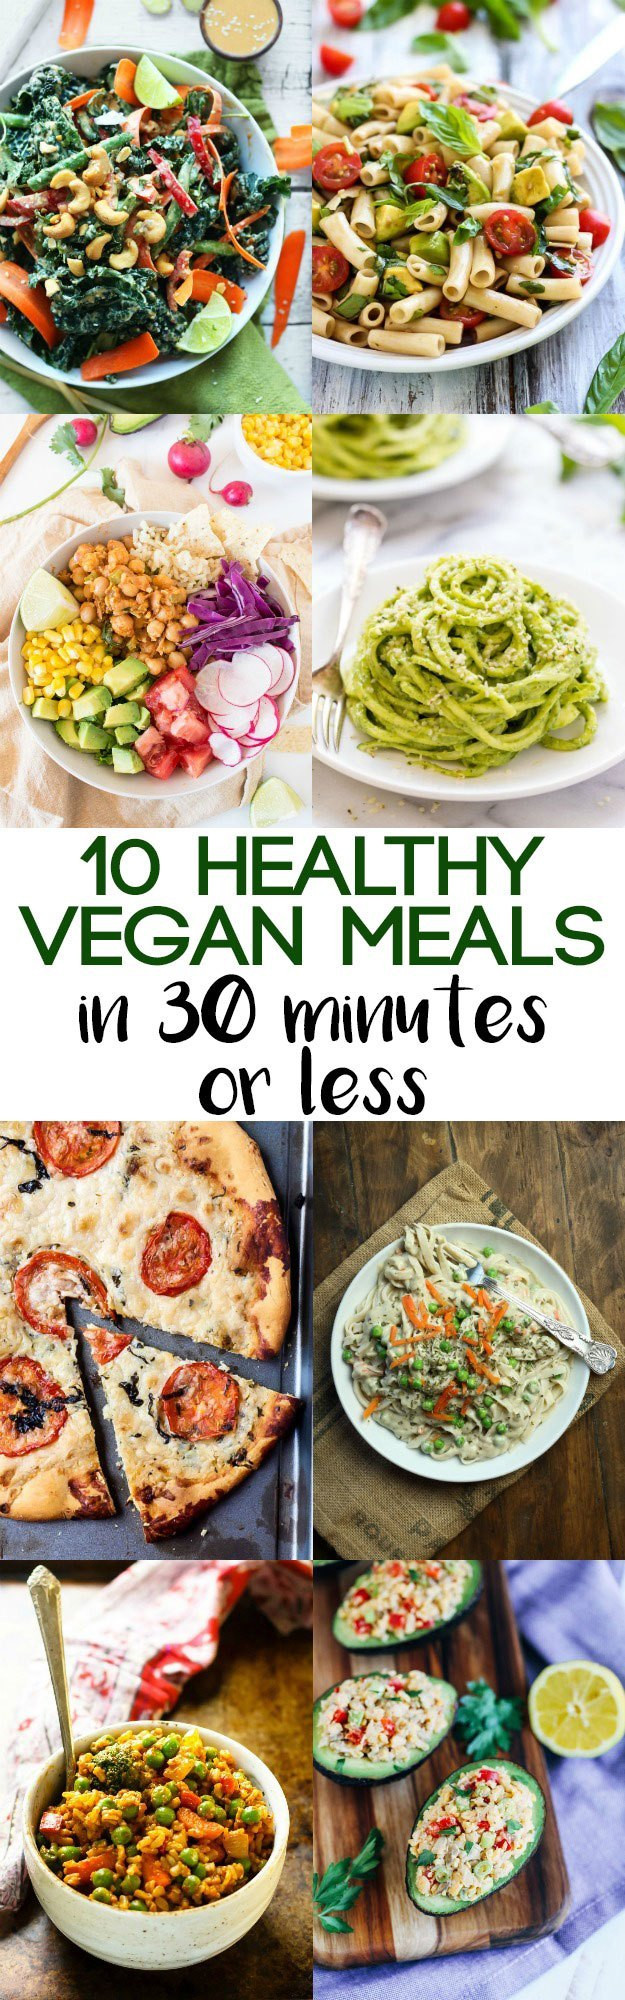 Healthy 30 Minute Meals
 10 Healthy Vegan Meals in 30 Minutes or Less